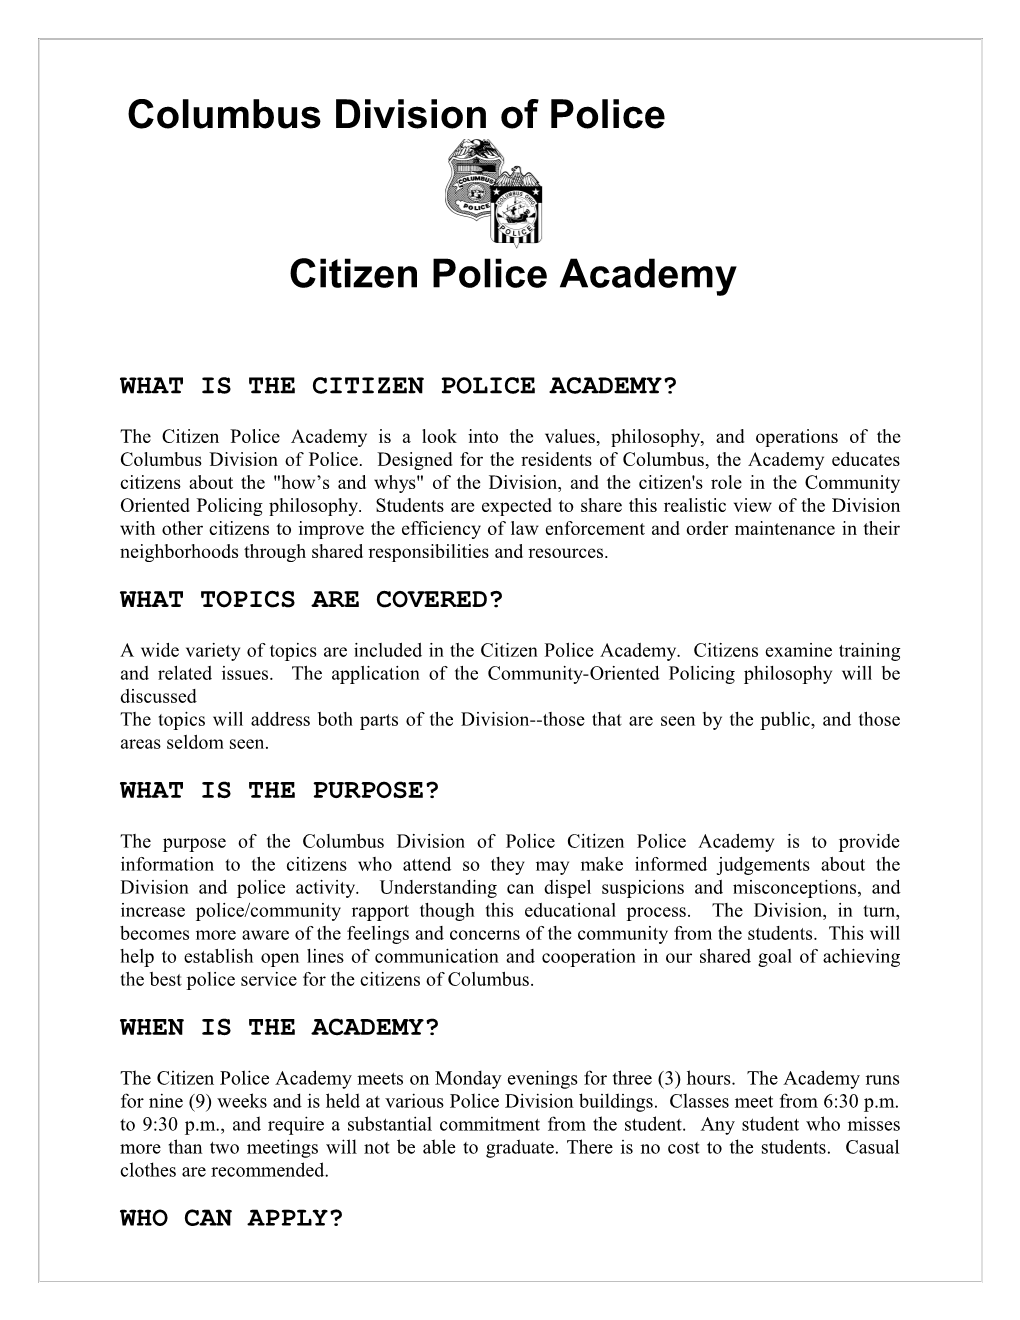 What Is the Citizen Police Academy?